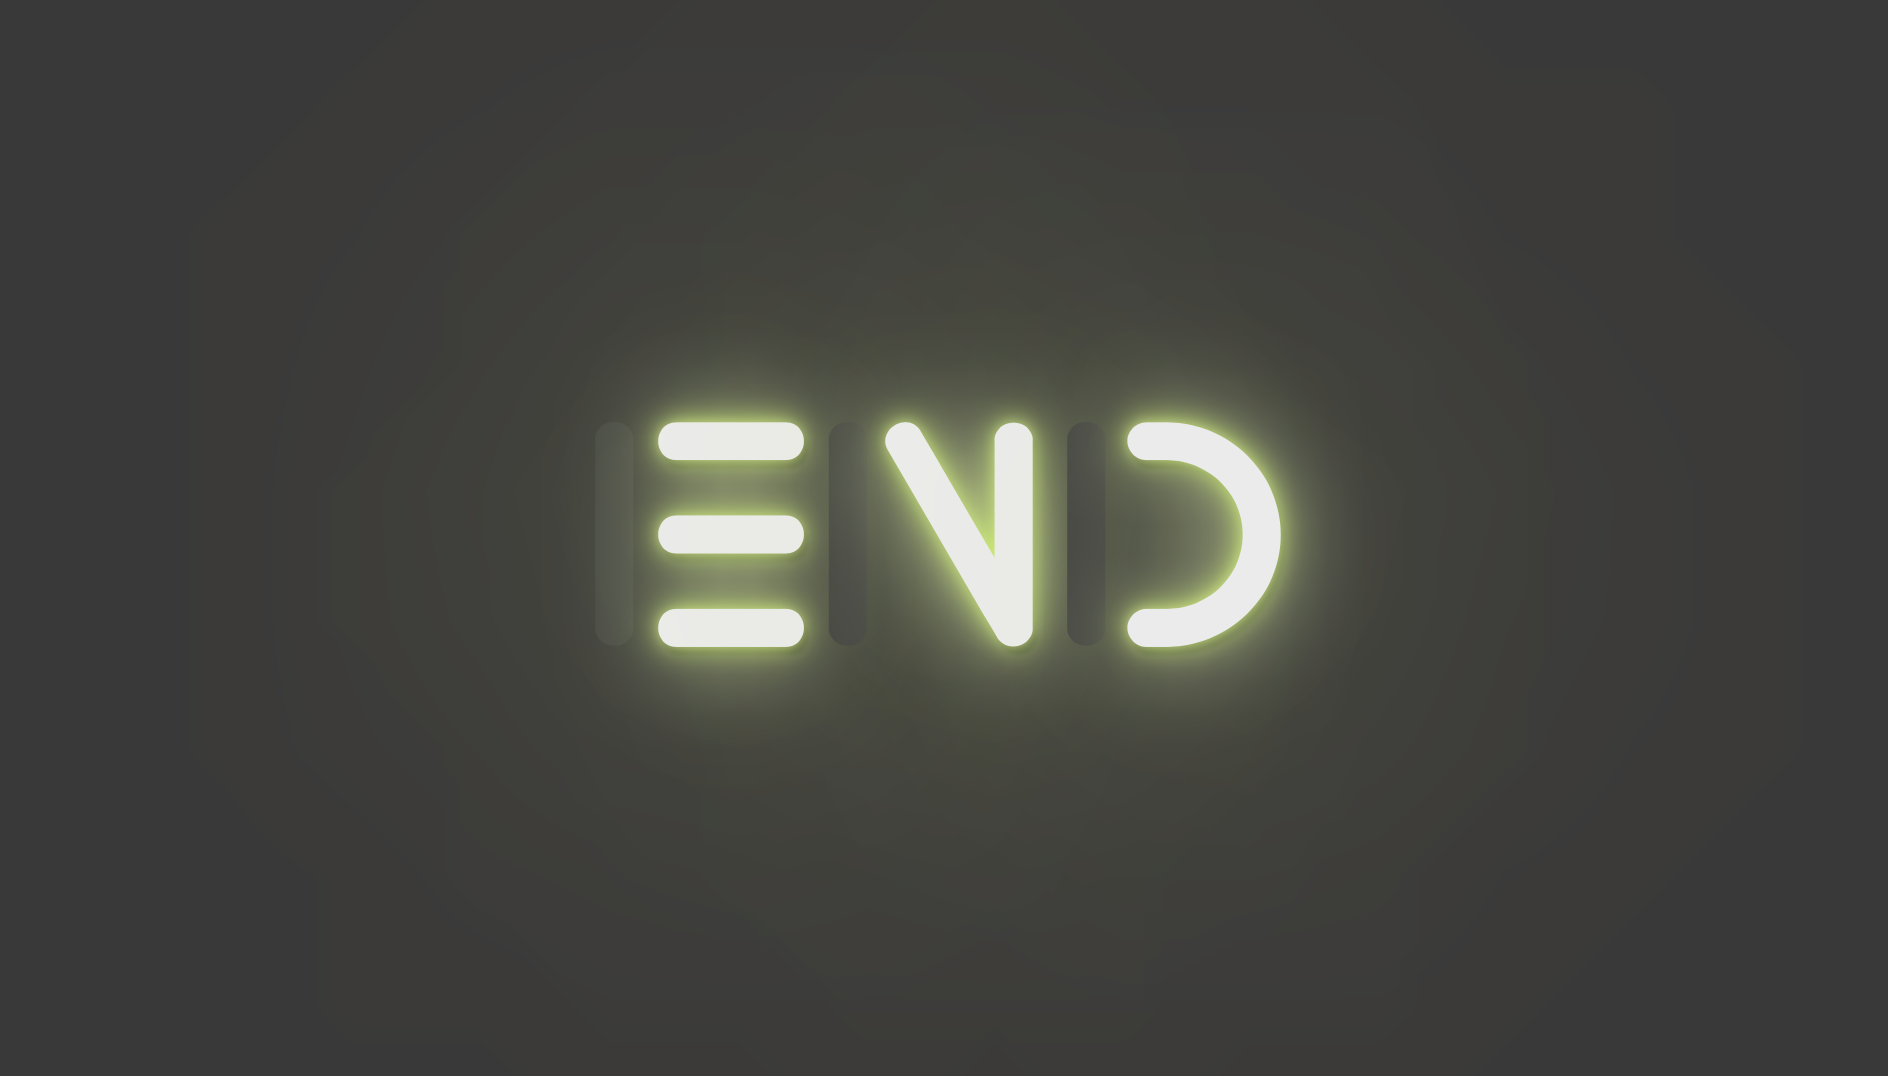 NEON lights of the word END